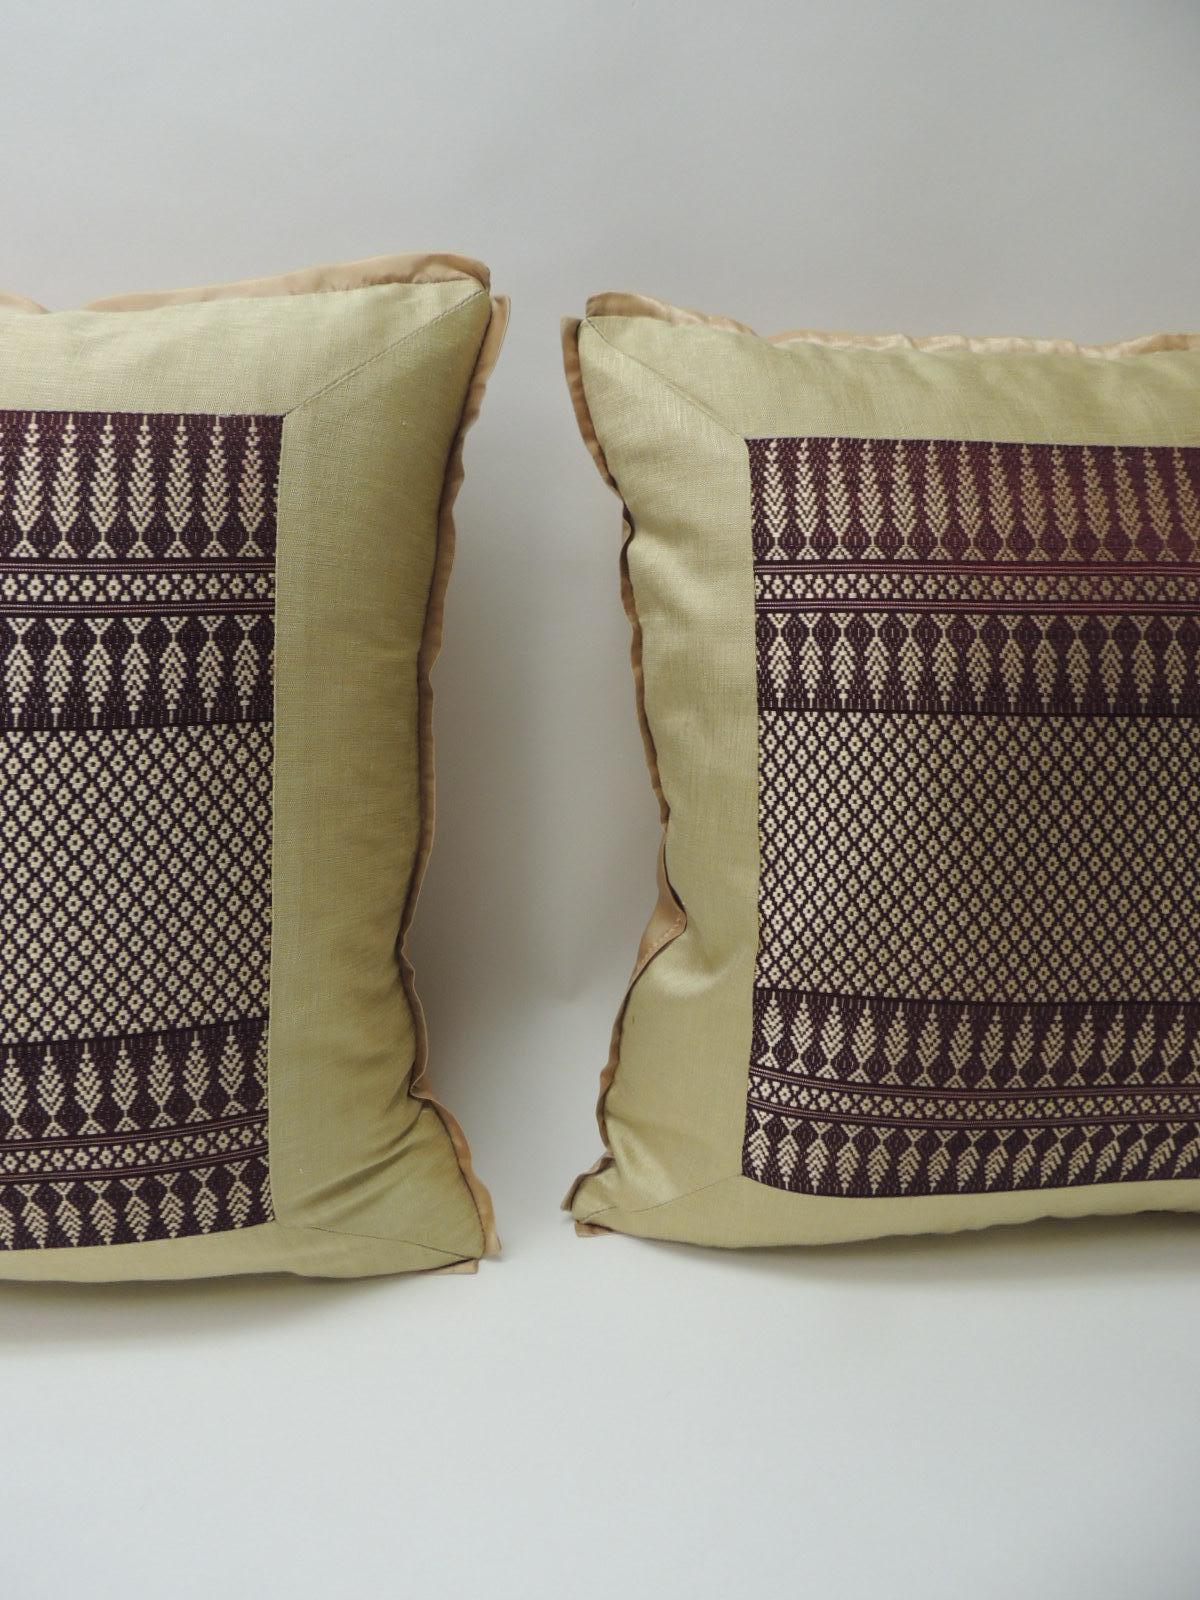 Pair of vintage silk burgundy and gold woven textile square decorative pillows
vintage gold and burgundy woven silk Asian artisanal textile decorative square pillows. The vintage silk Asian textile in the front of the pillow is framed with gold